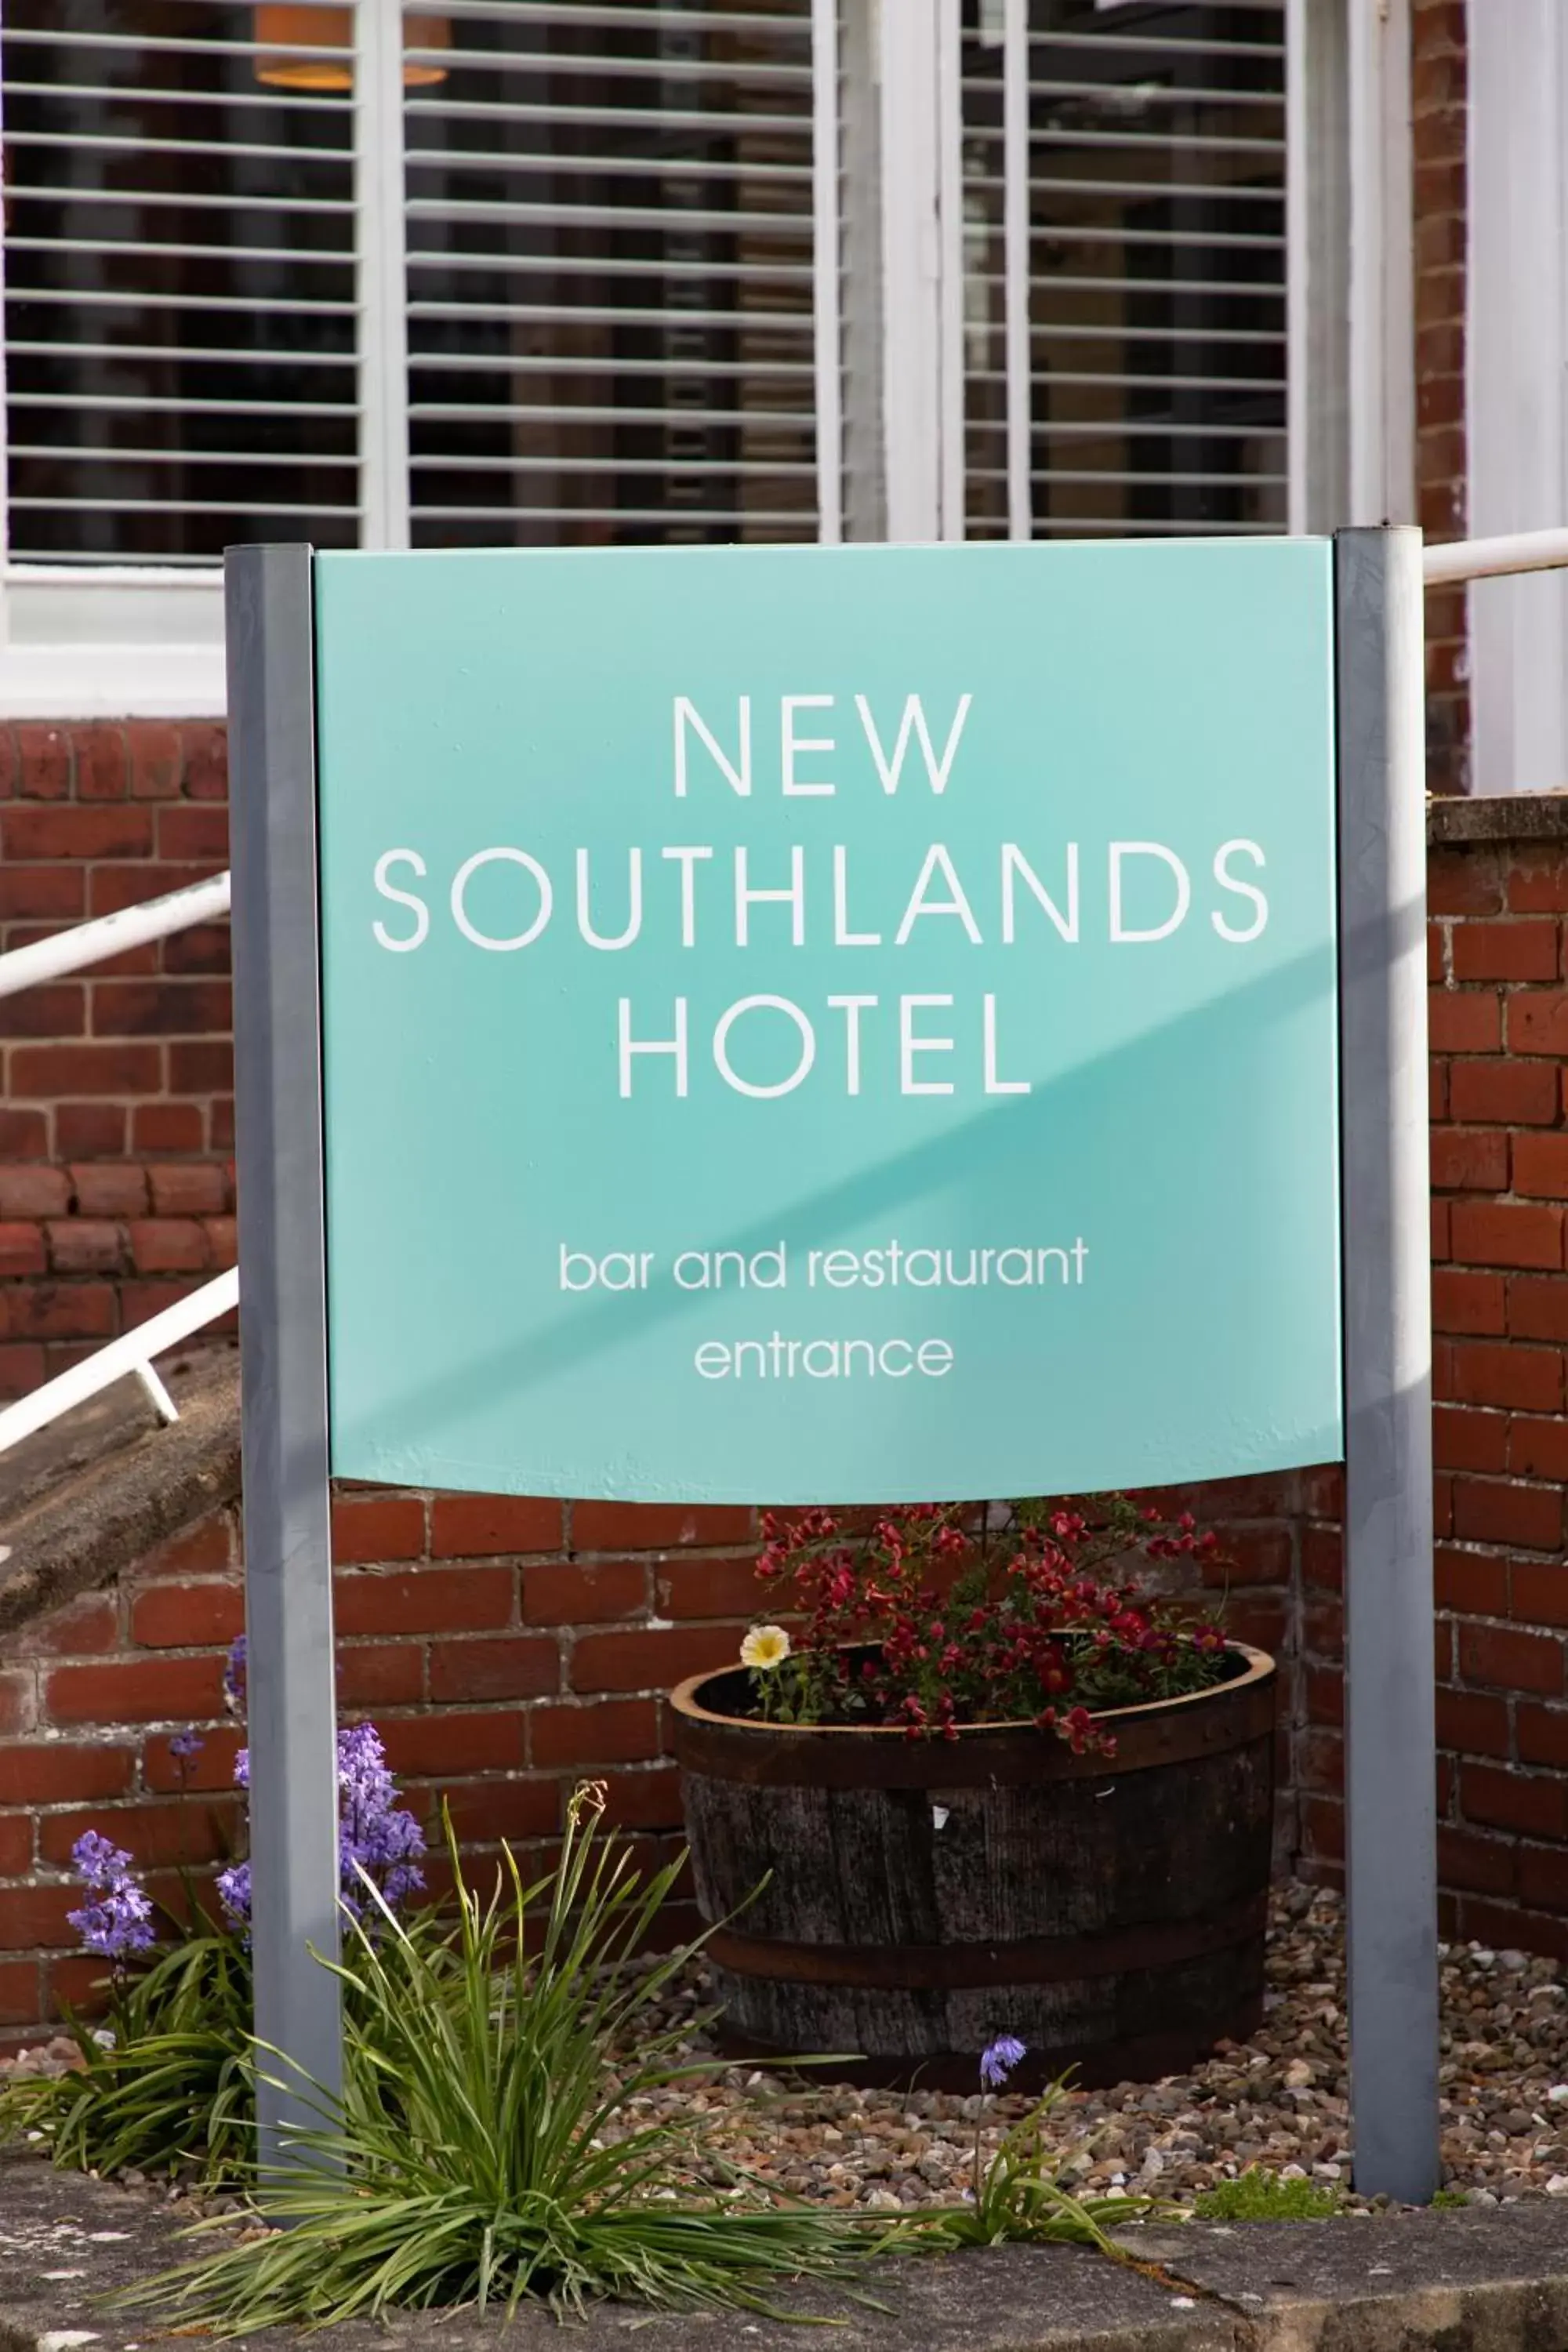 Property logo or sign in The New Southlands Hotel